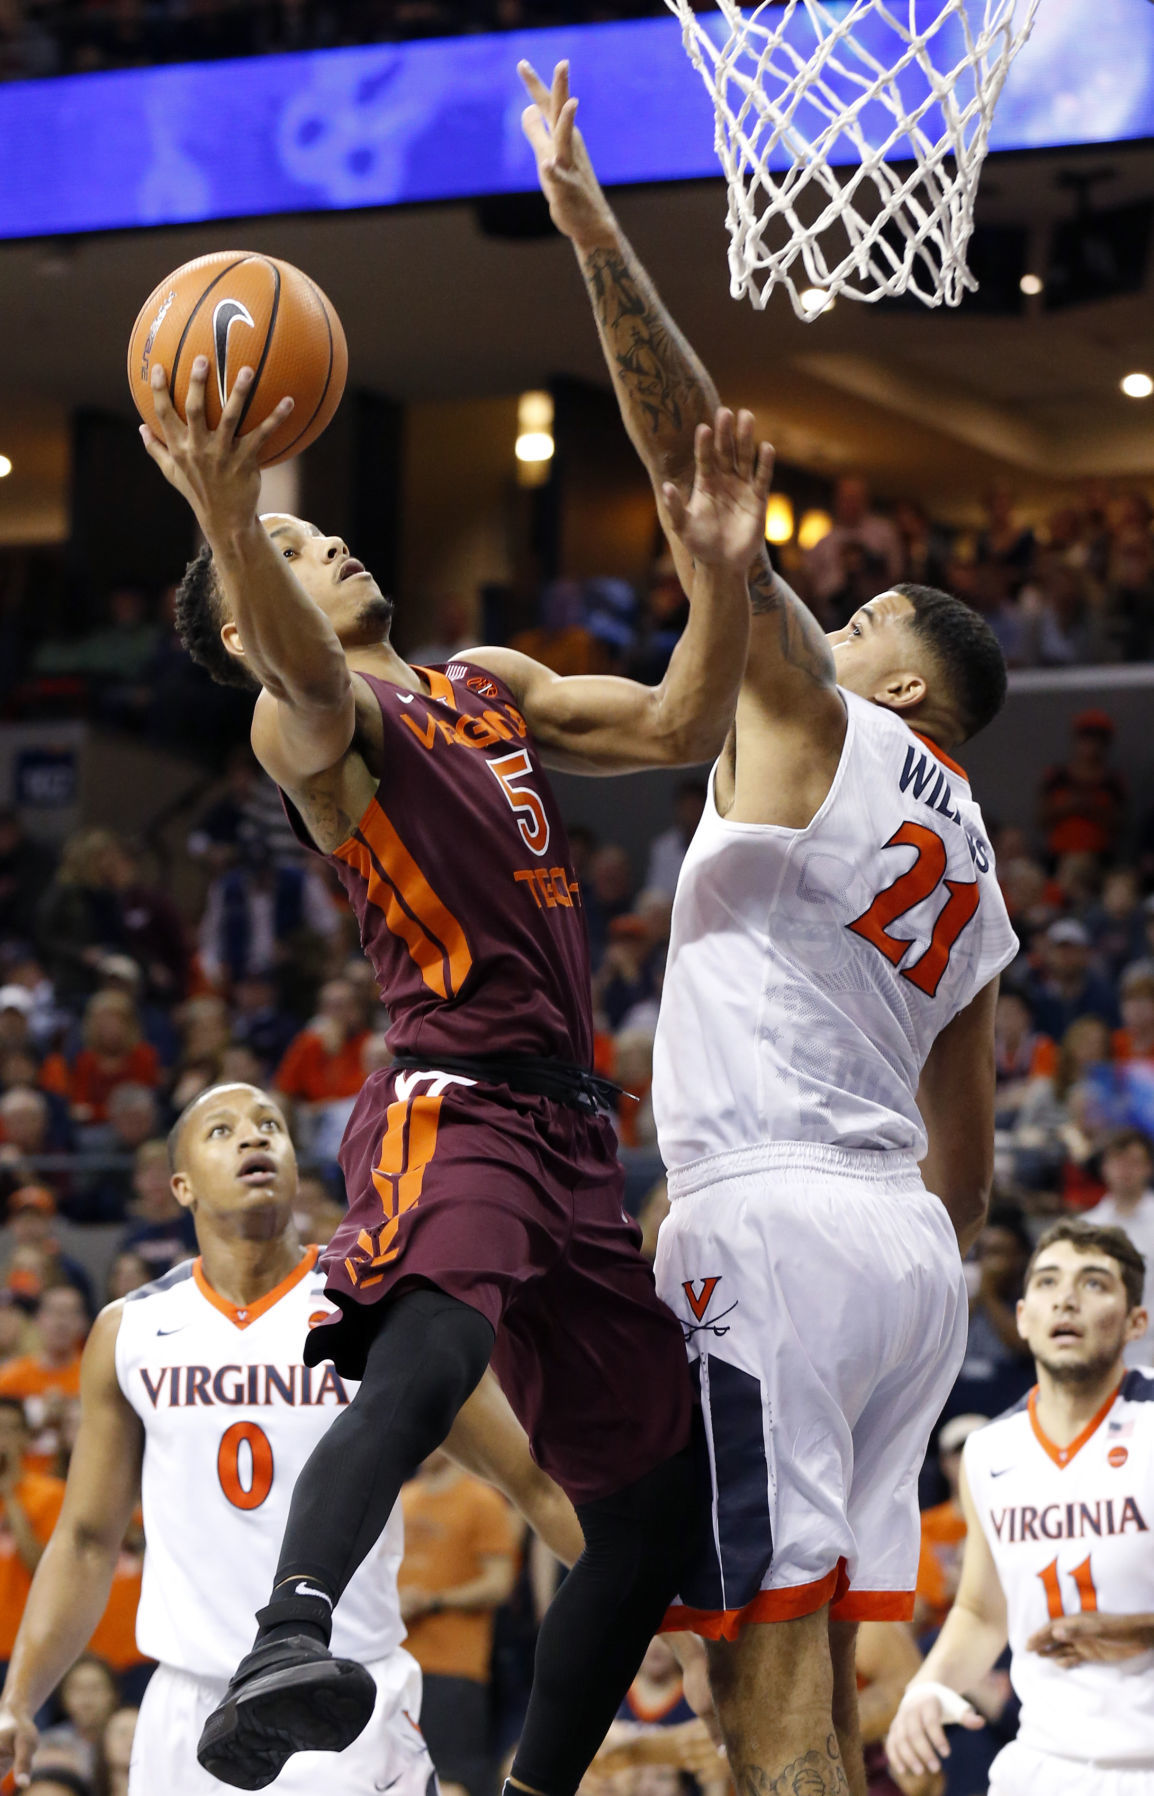 Virginia Tech upsets rival UVA in overtime, hands No. 2 Cavaliers first